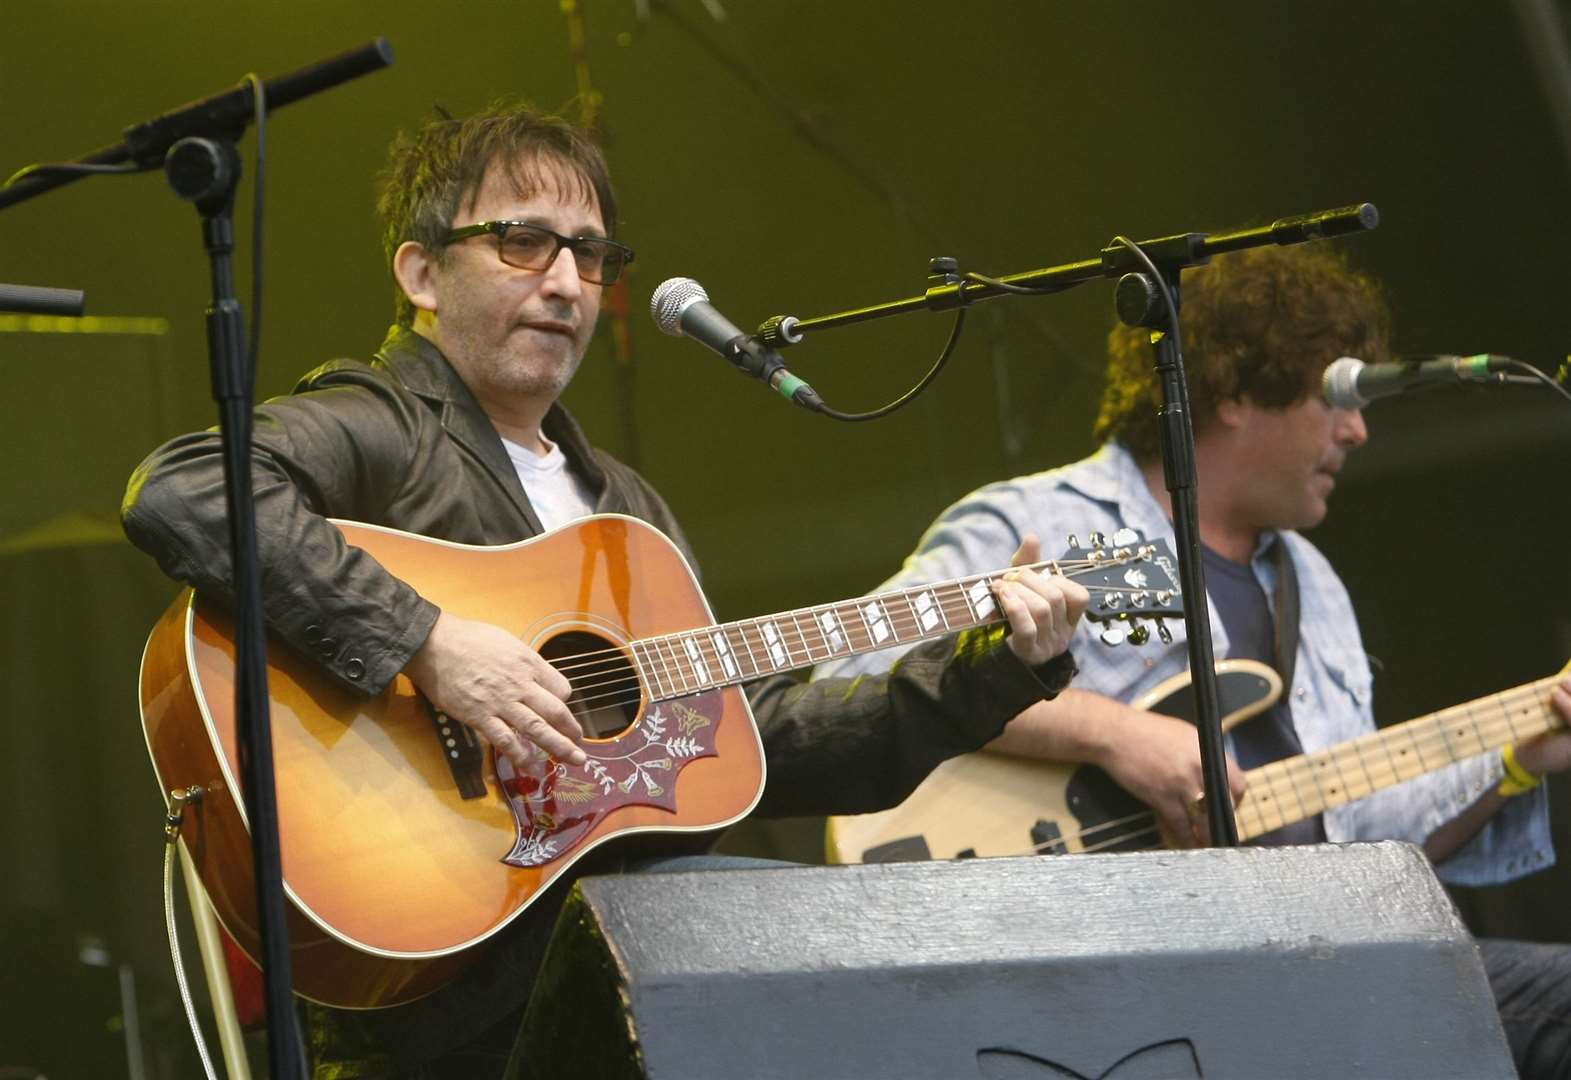 The Lightning Seeds, known for performing football anthem 'Three Lions' will be playing at the CREATE Festival